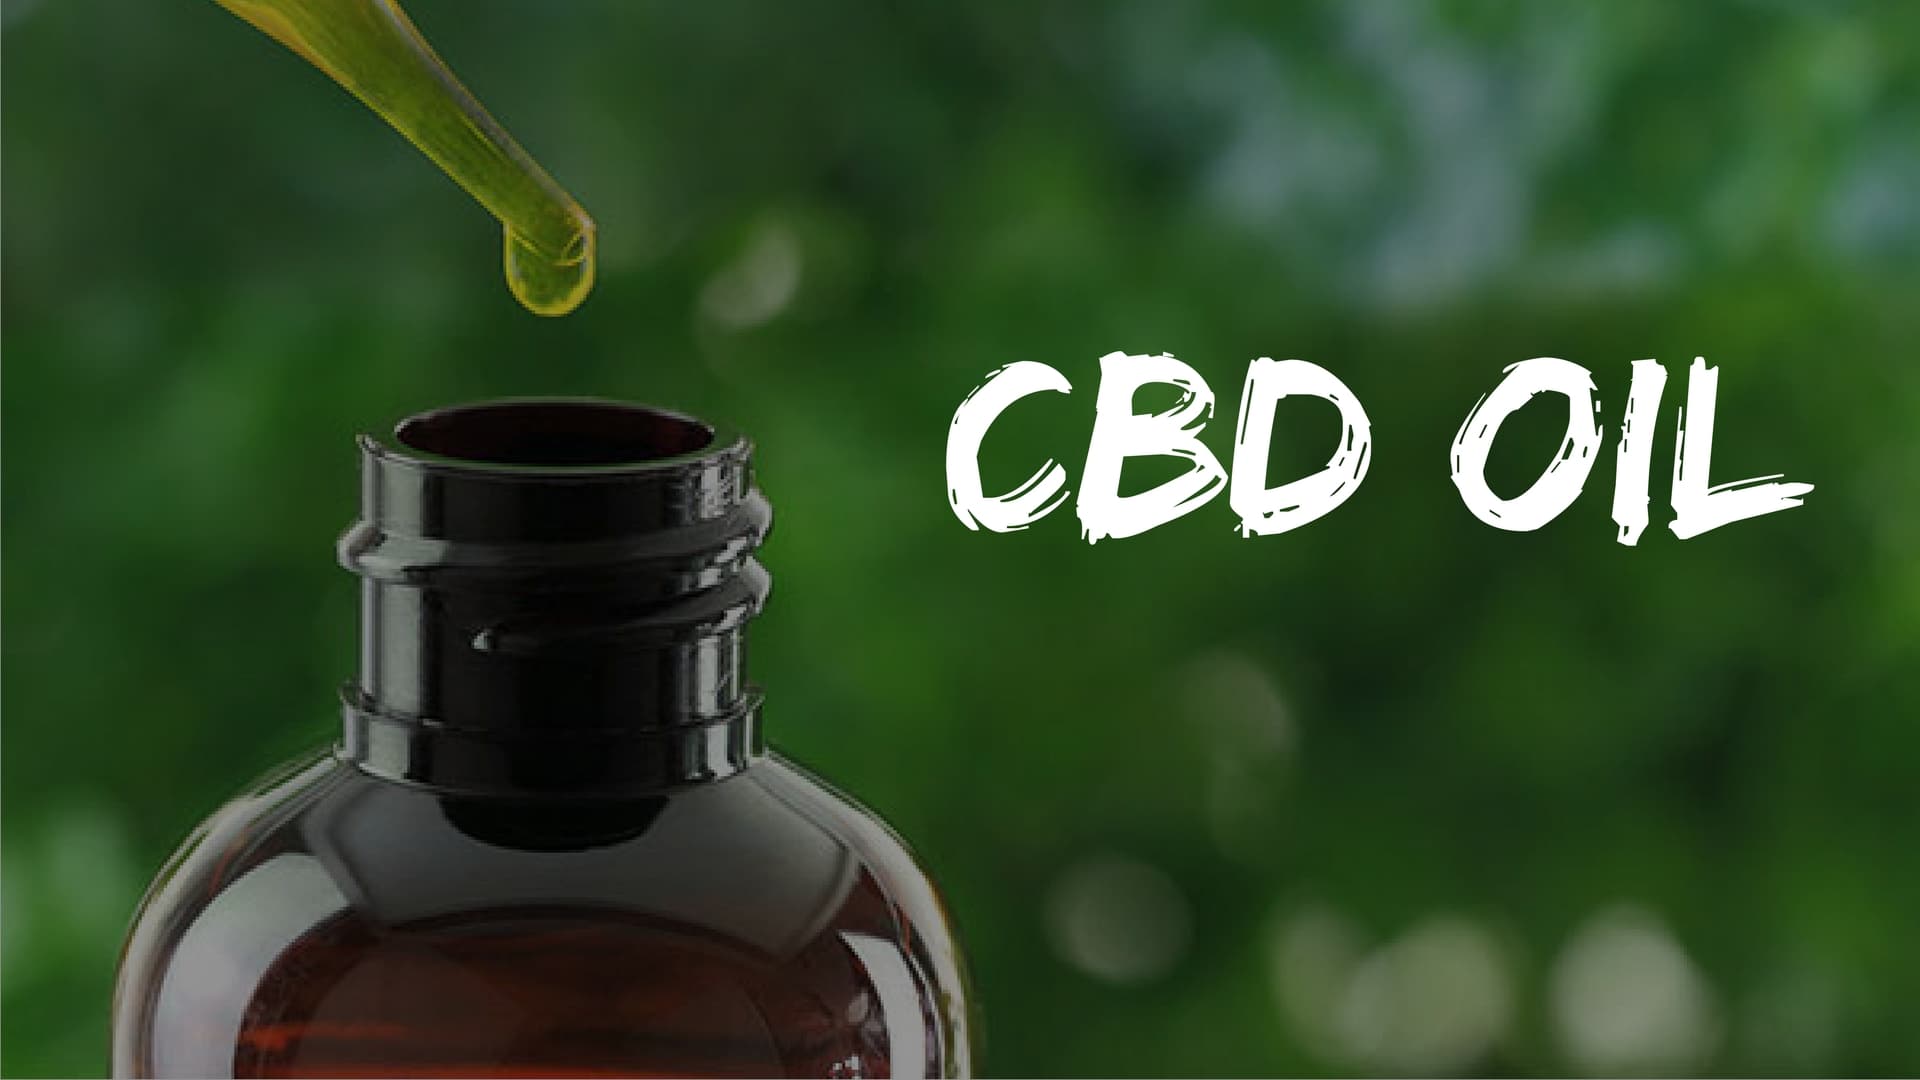 What Are The Healthy Benefits Of Cbd Oil?